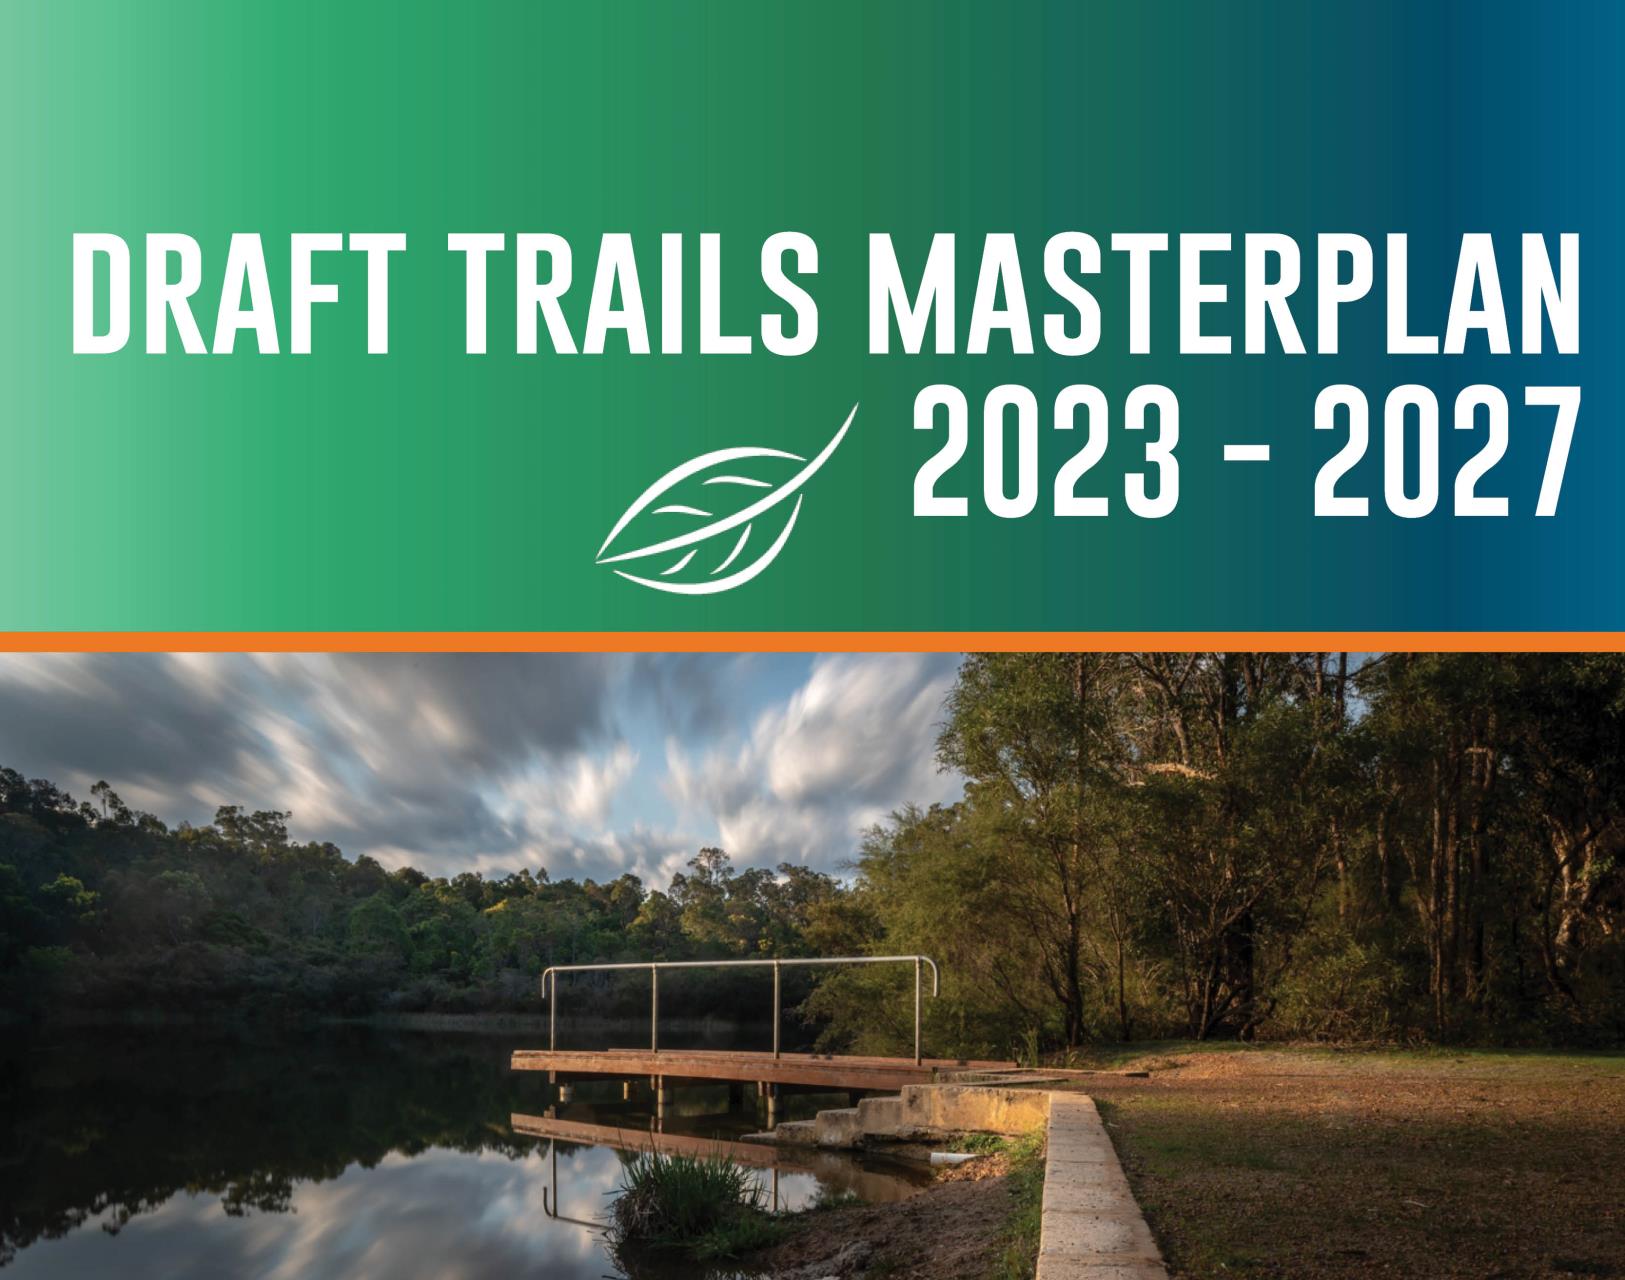 Draft Trails Master Plan 2023 - 2027 Open for community Comment